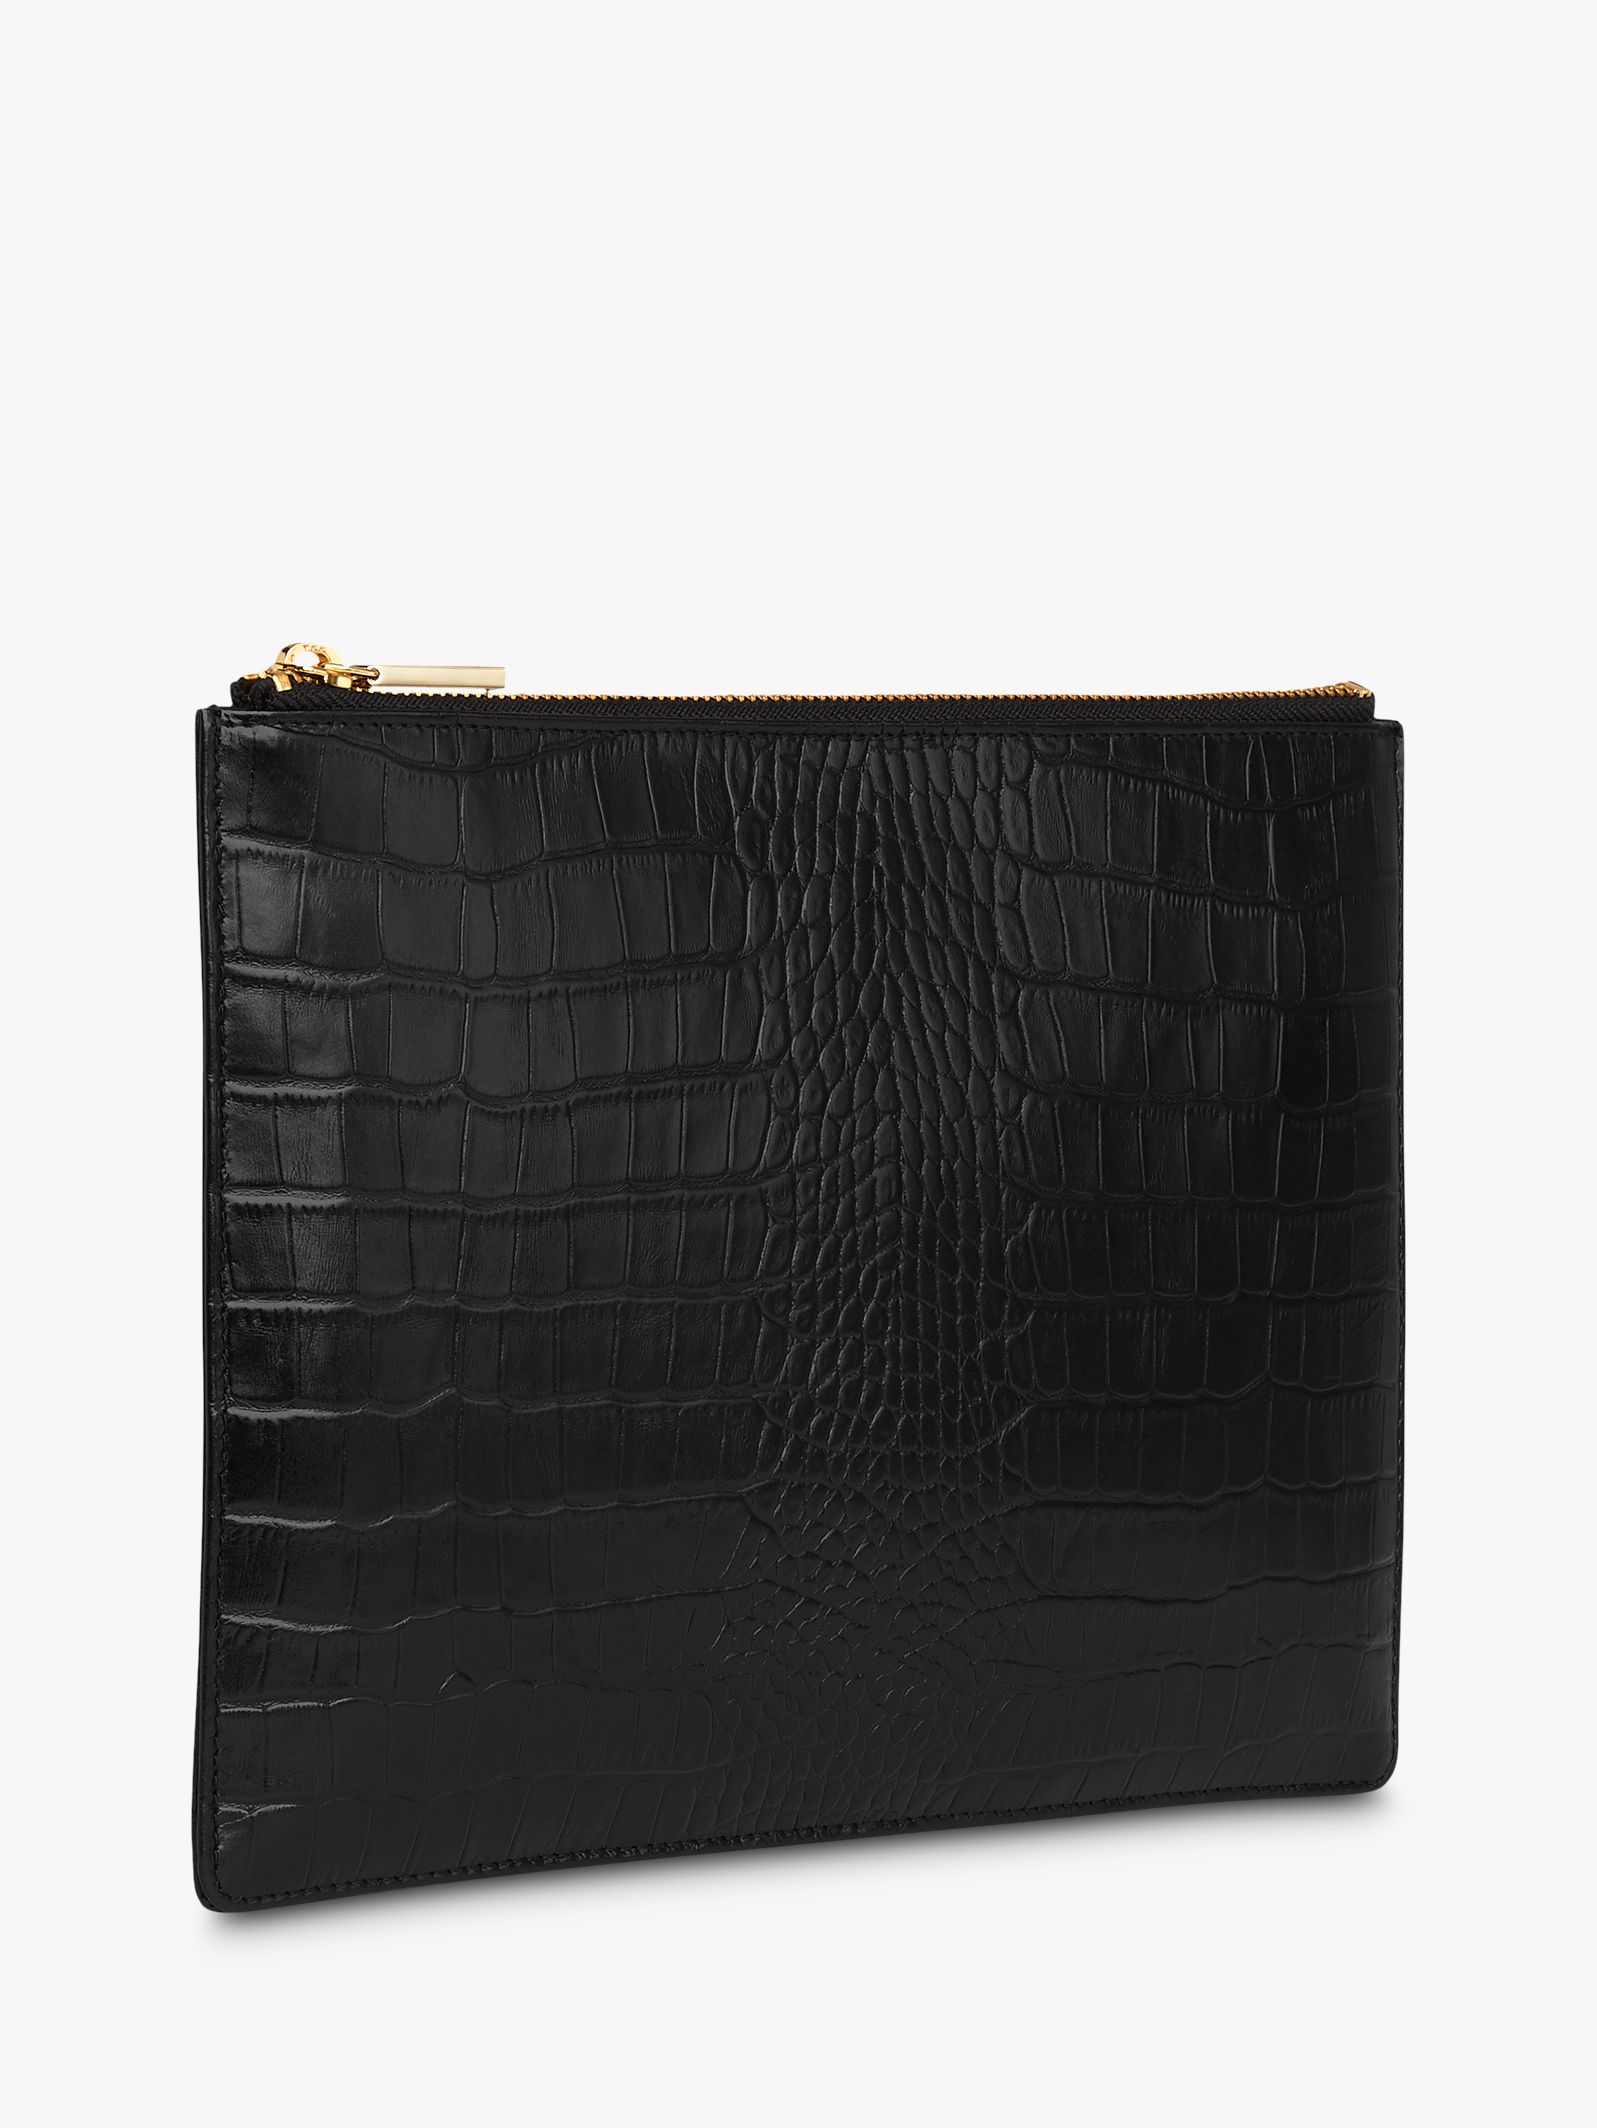 Whistles Shiny Croc Zip Leather Purse at John Lewis & Partners